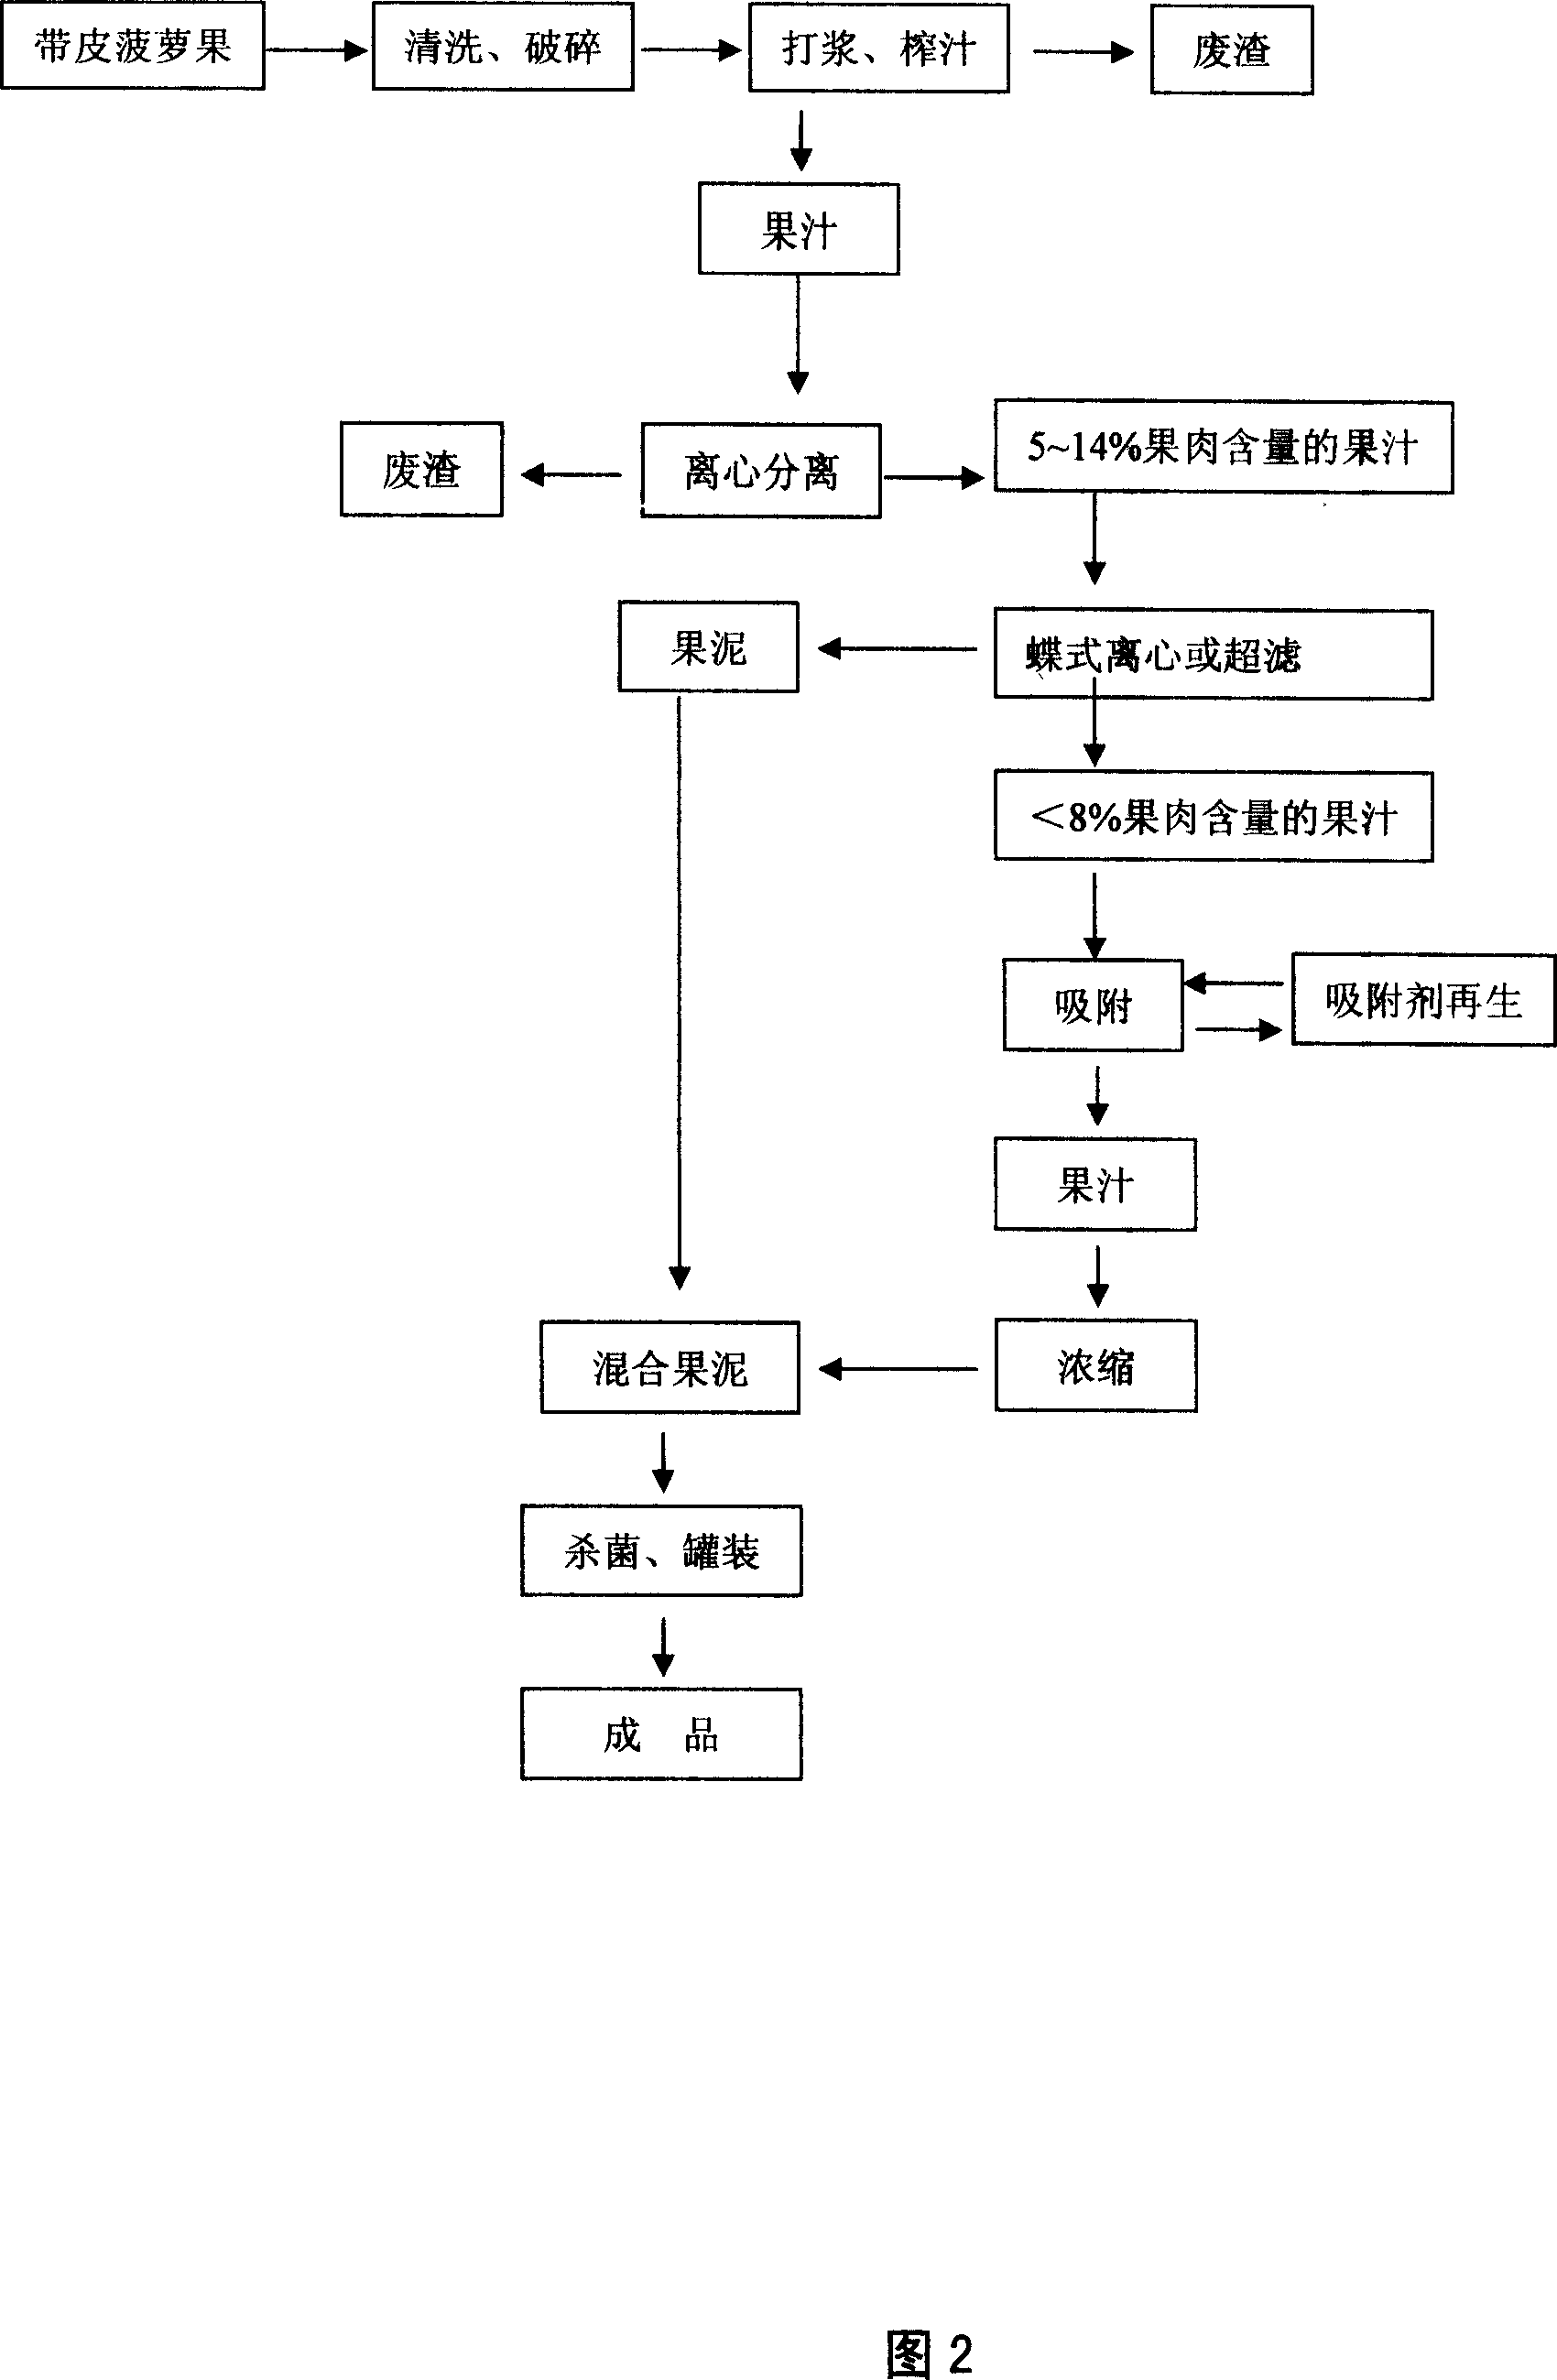 Production method for decreasing brown change of pineapple concentrated juice